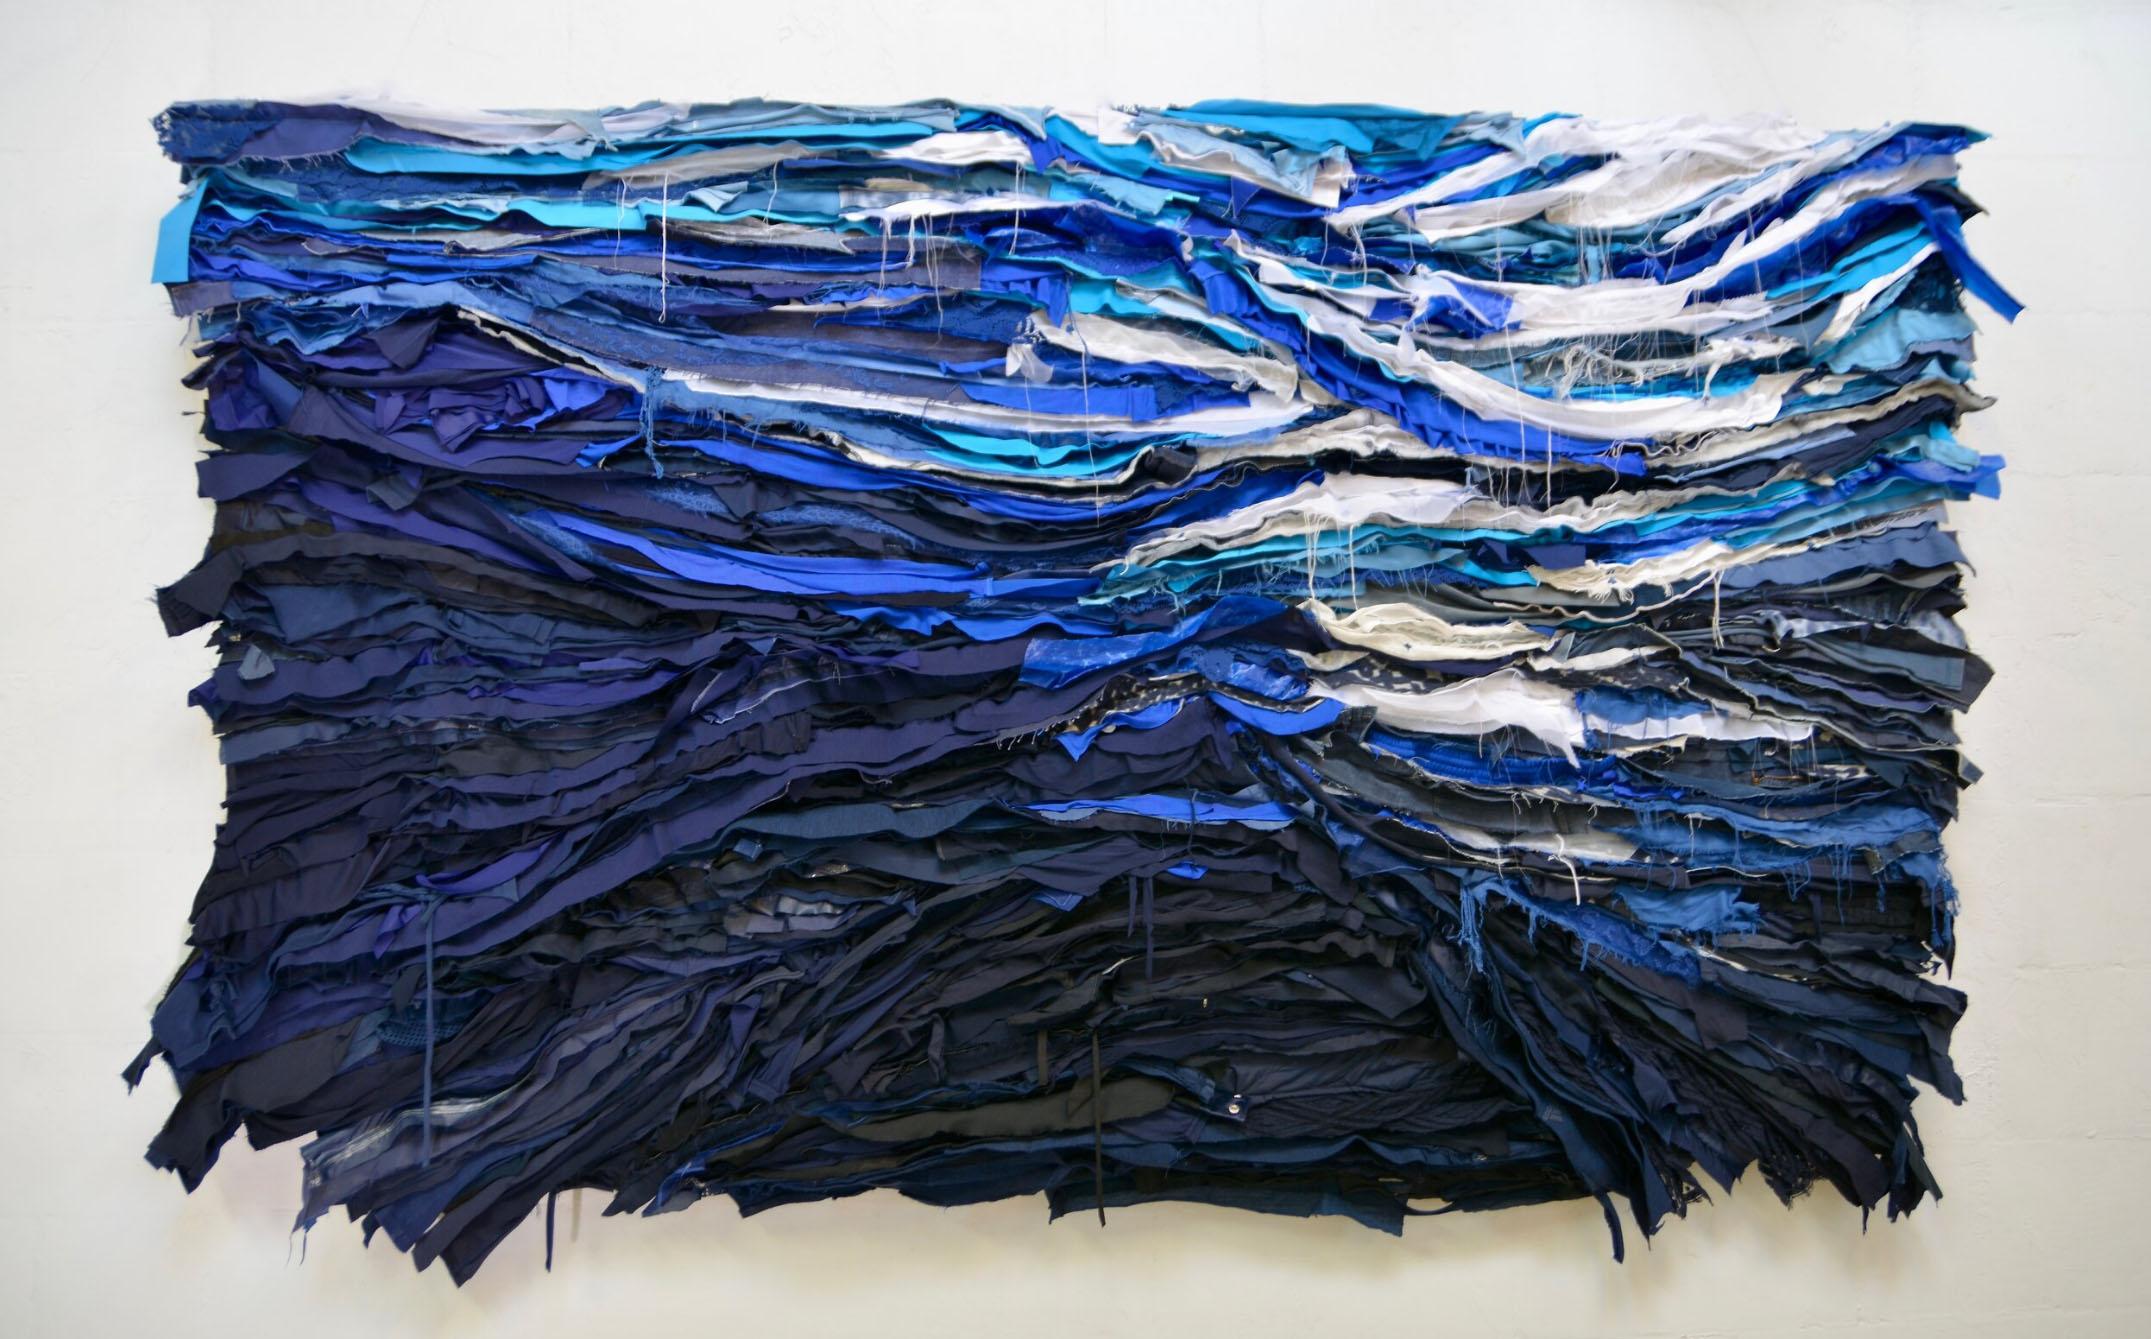 Femke van Gemert uses discard textile to create her sustainable soft wall art reliefs. This work is made of the clothing leftovers and reveals some details of the clothing, such as zips, buttons and labels. The work is devoted to the sea